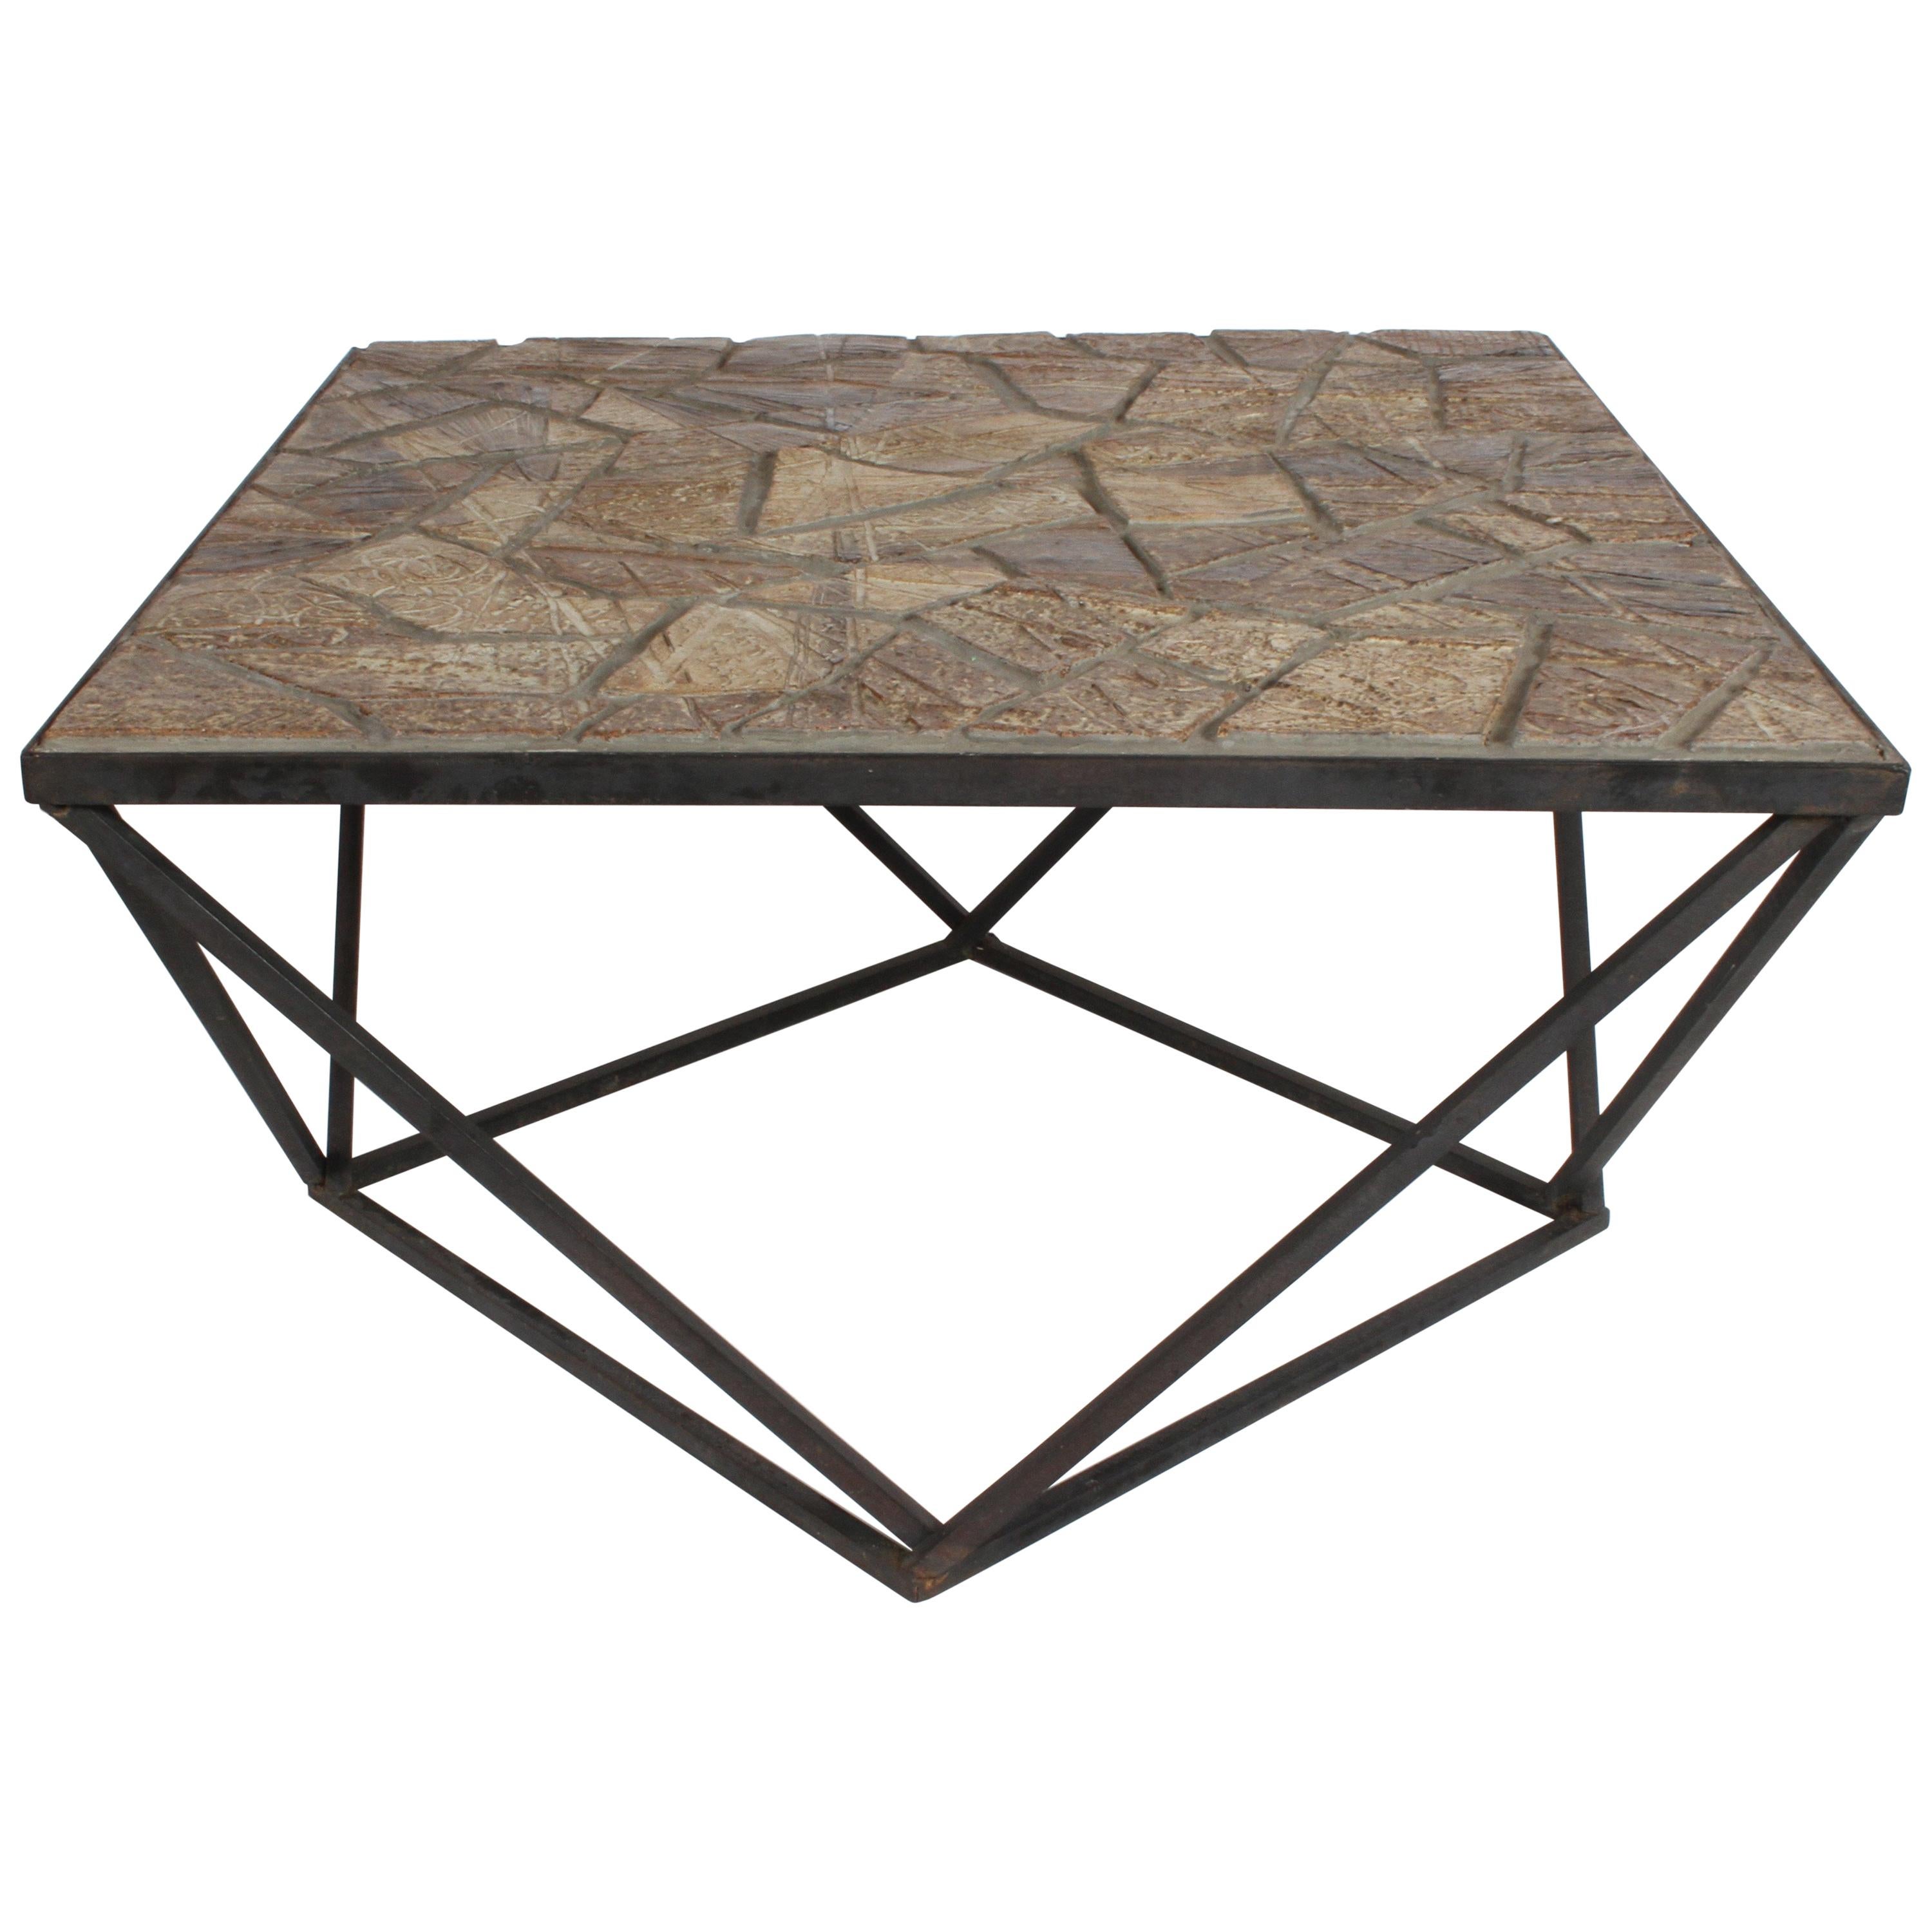 J. Ormond Sanderson Straw Valley Pottery Mid-Century Modern Cubist Coffee Table  For Sale